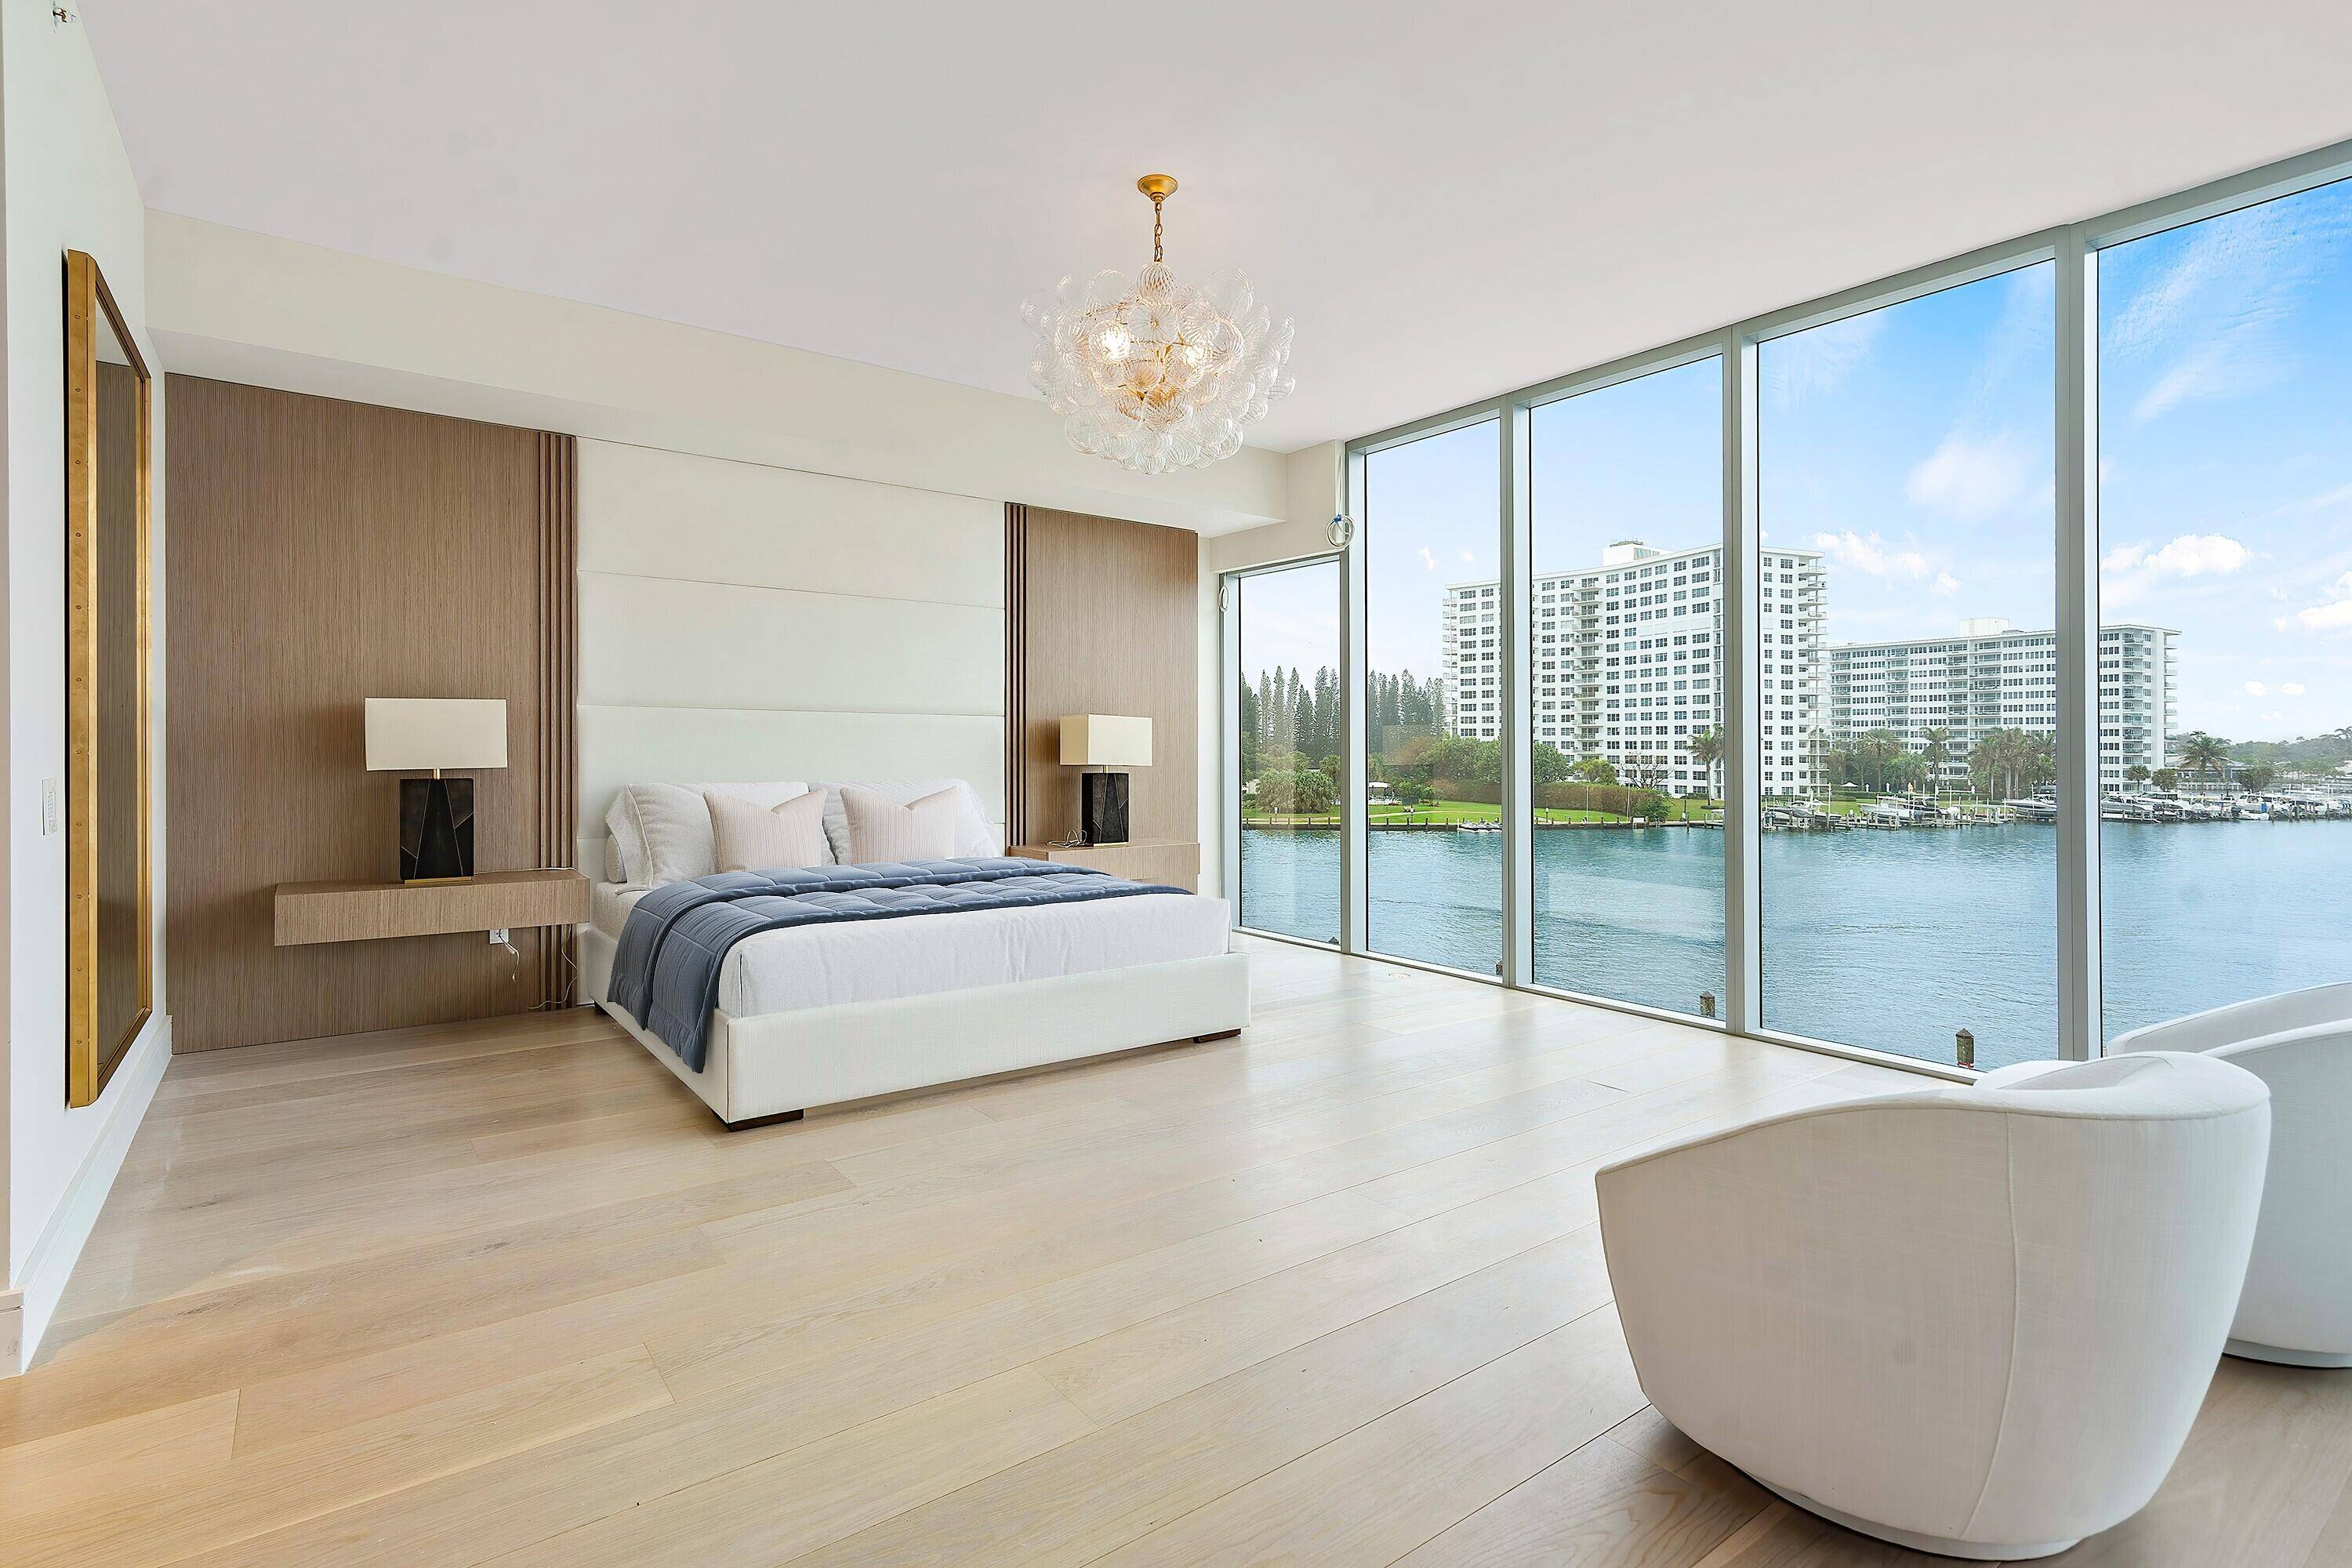 Introducing Unit 303, a brand new condominium, a true trophy property situated in an unparalleled one of a kind location at the extraordinary Boca Beach Residences, where luxury living meets ...